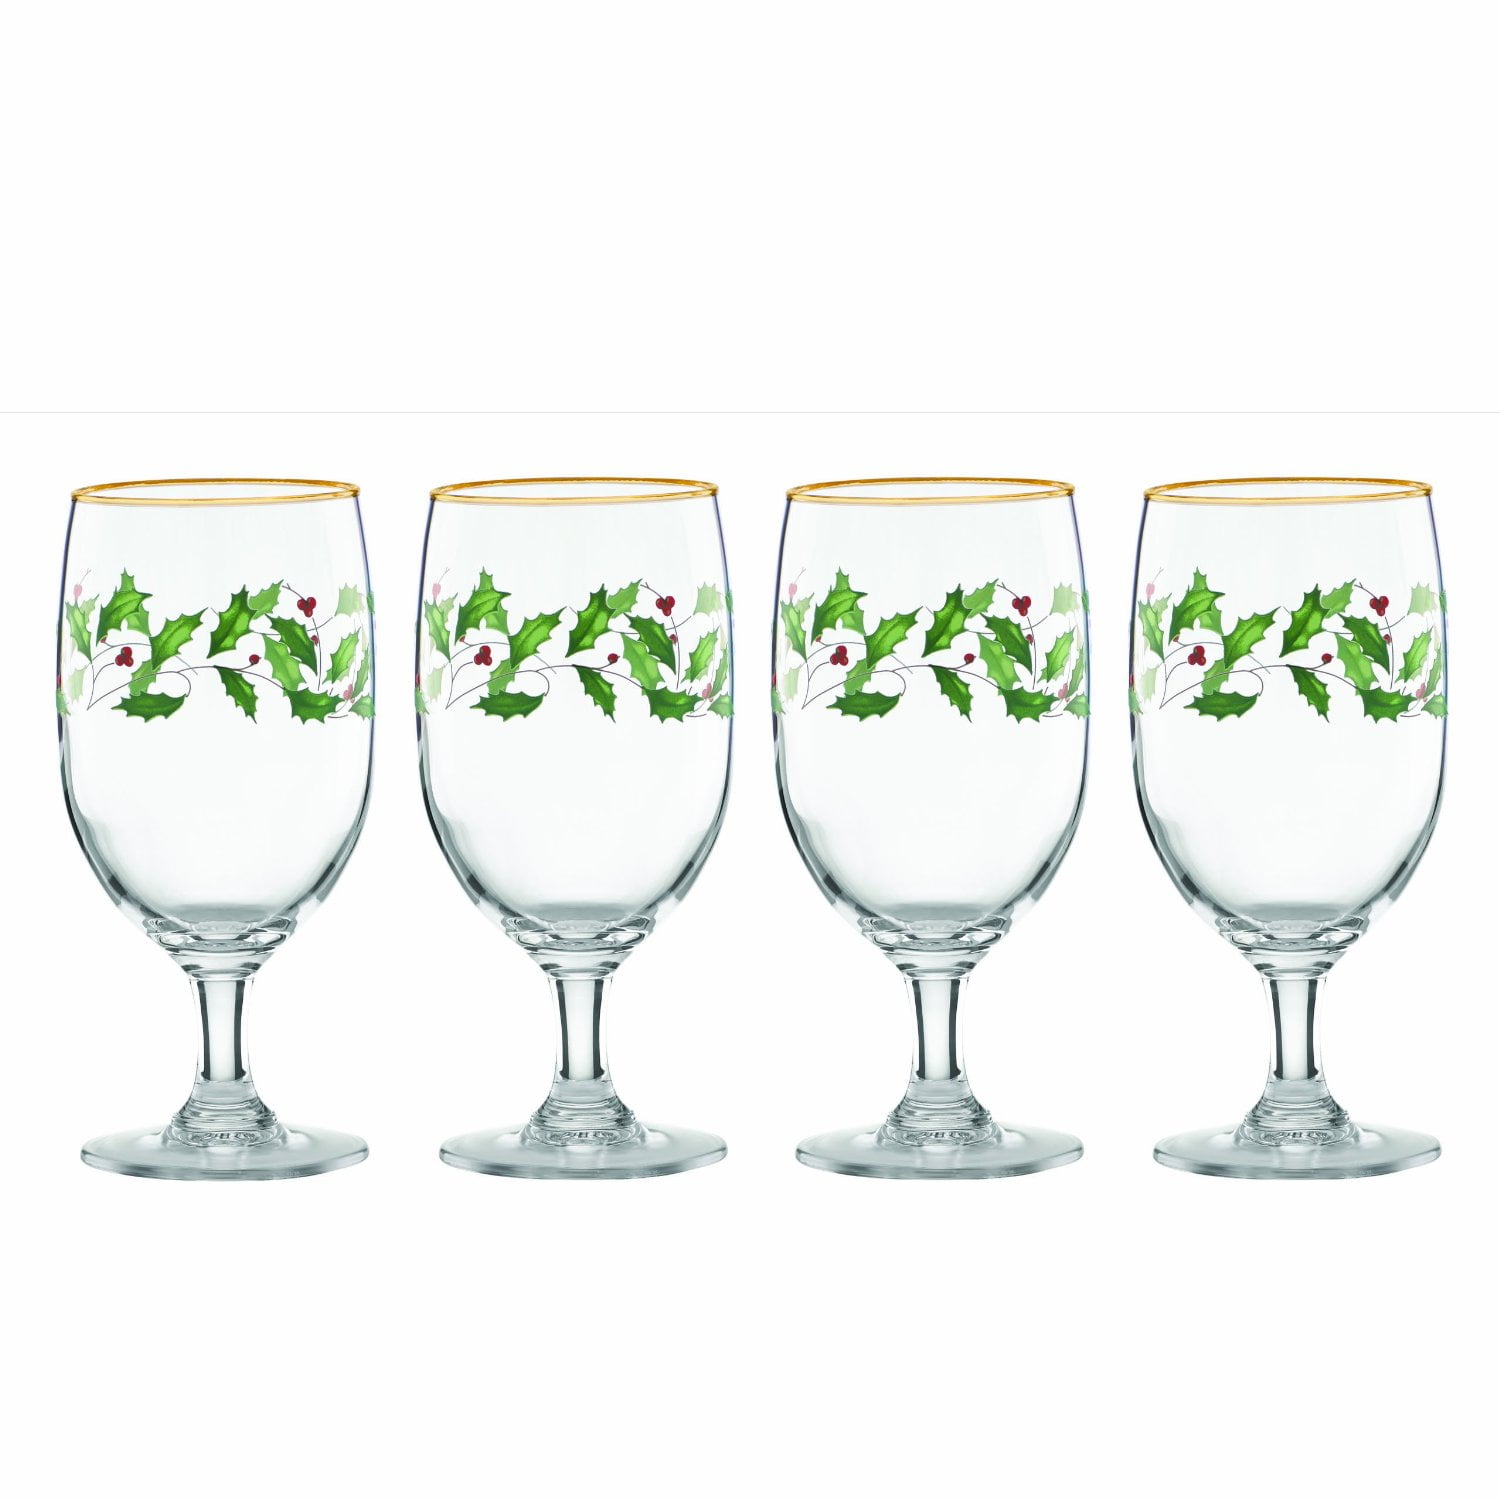 Holiday Iced Beverage Glass by Lenox Set of 4 